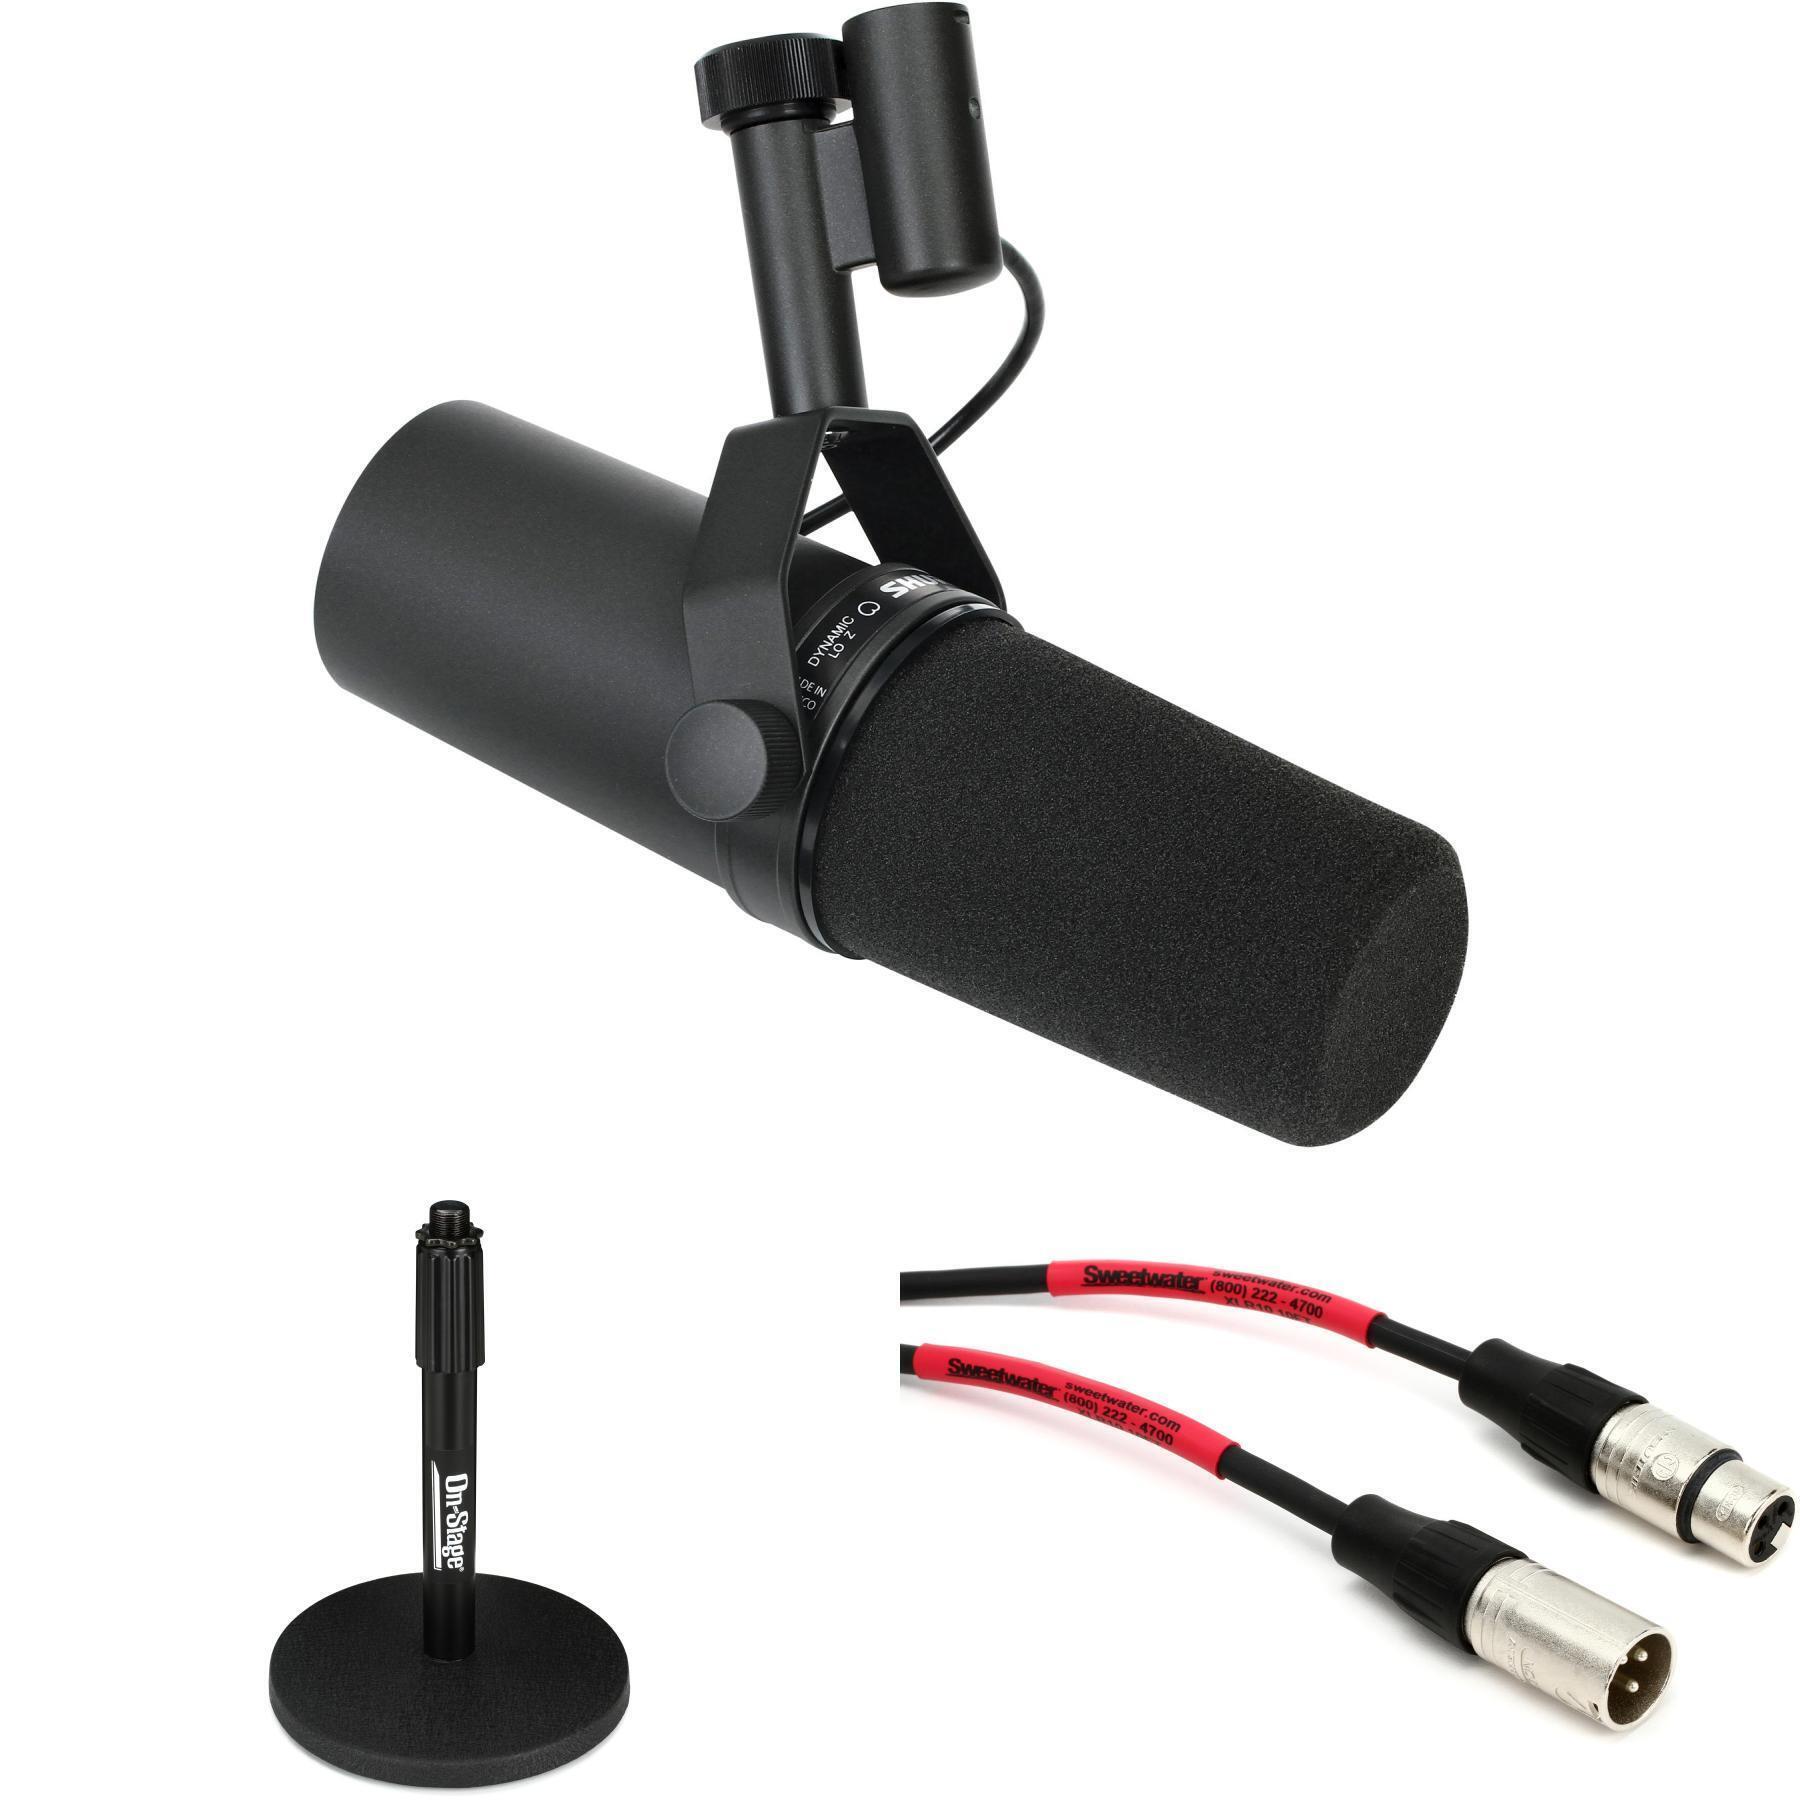 Shure SM7B Cardioid Dynamic Microphone with Desk Stand Kit